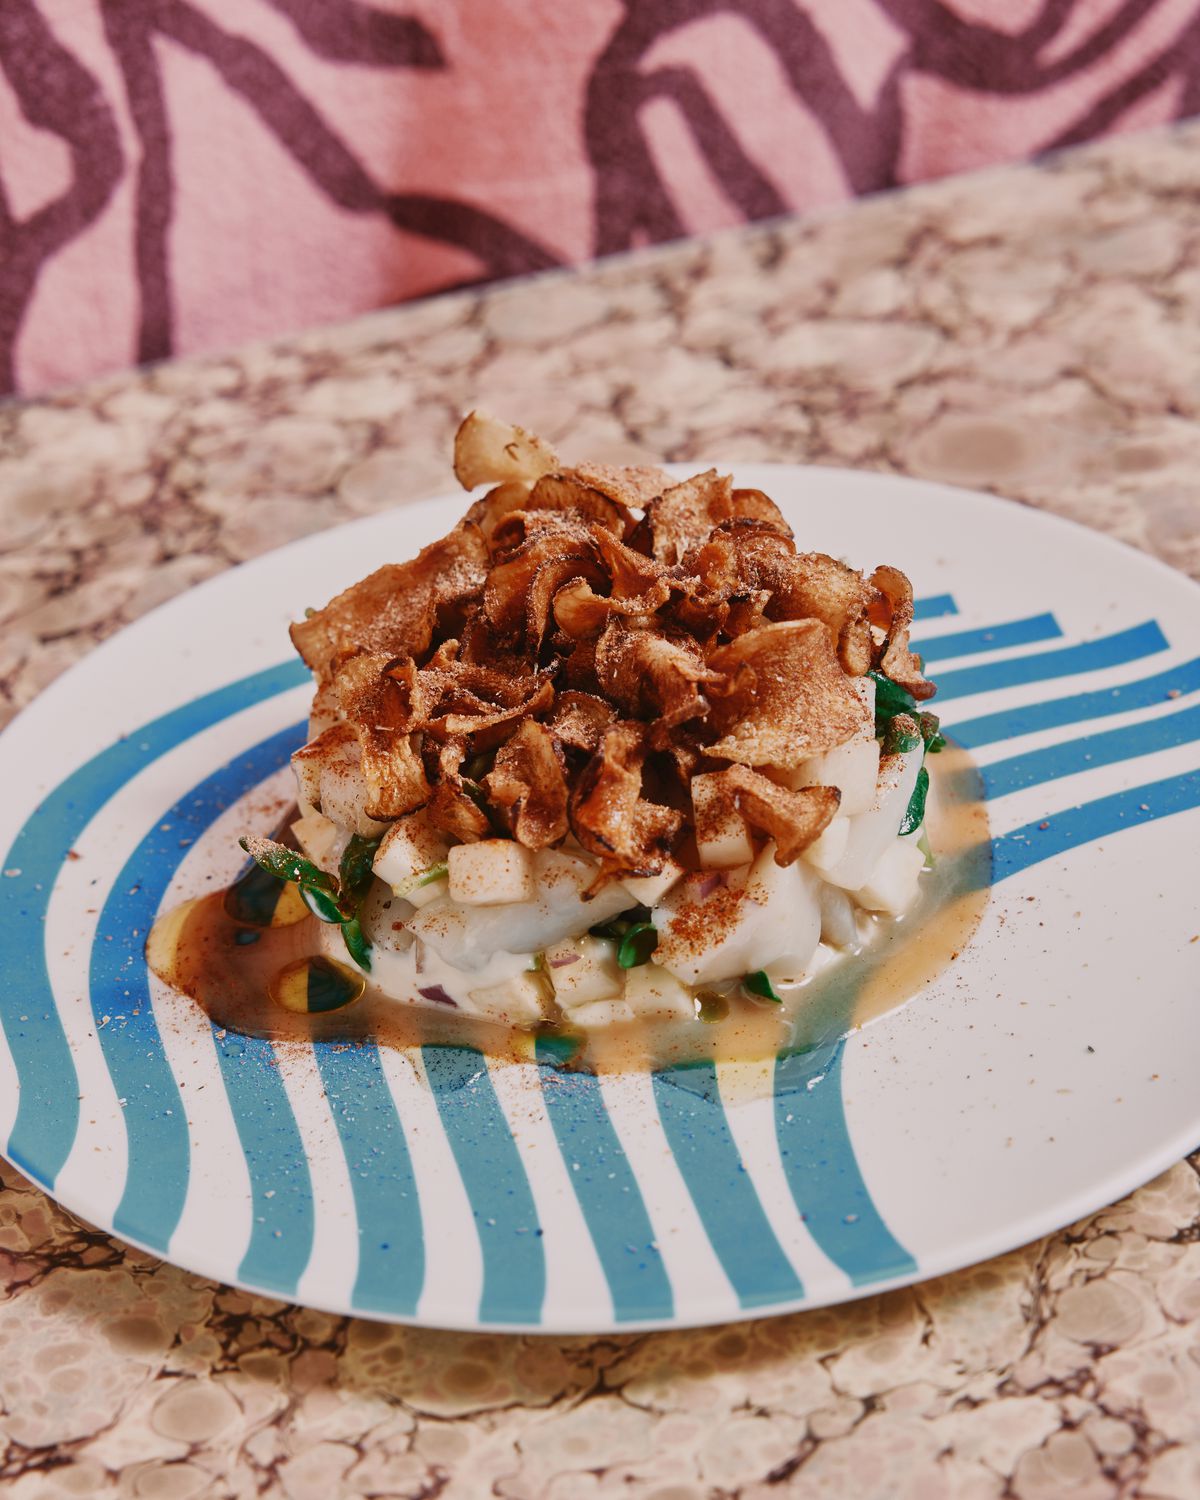 A circular pile of raw seafood topped by crispy brown chips on a white plate decorated with wavy blue stripes.